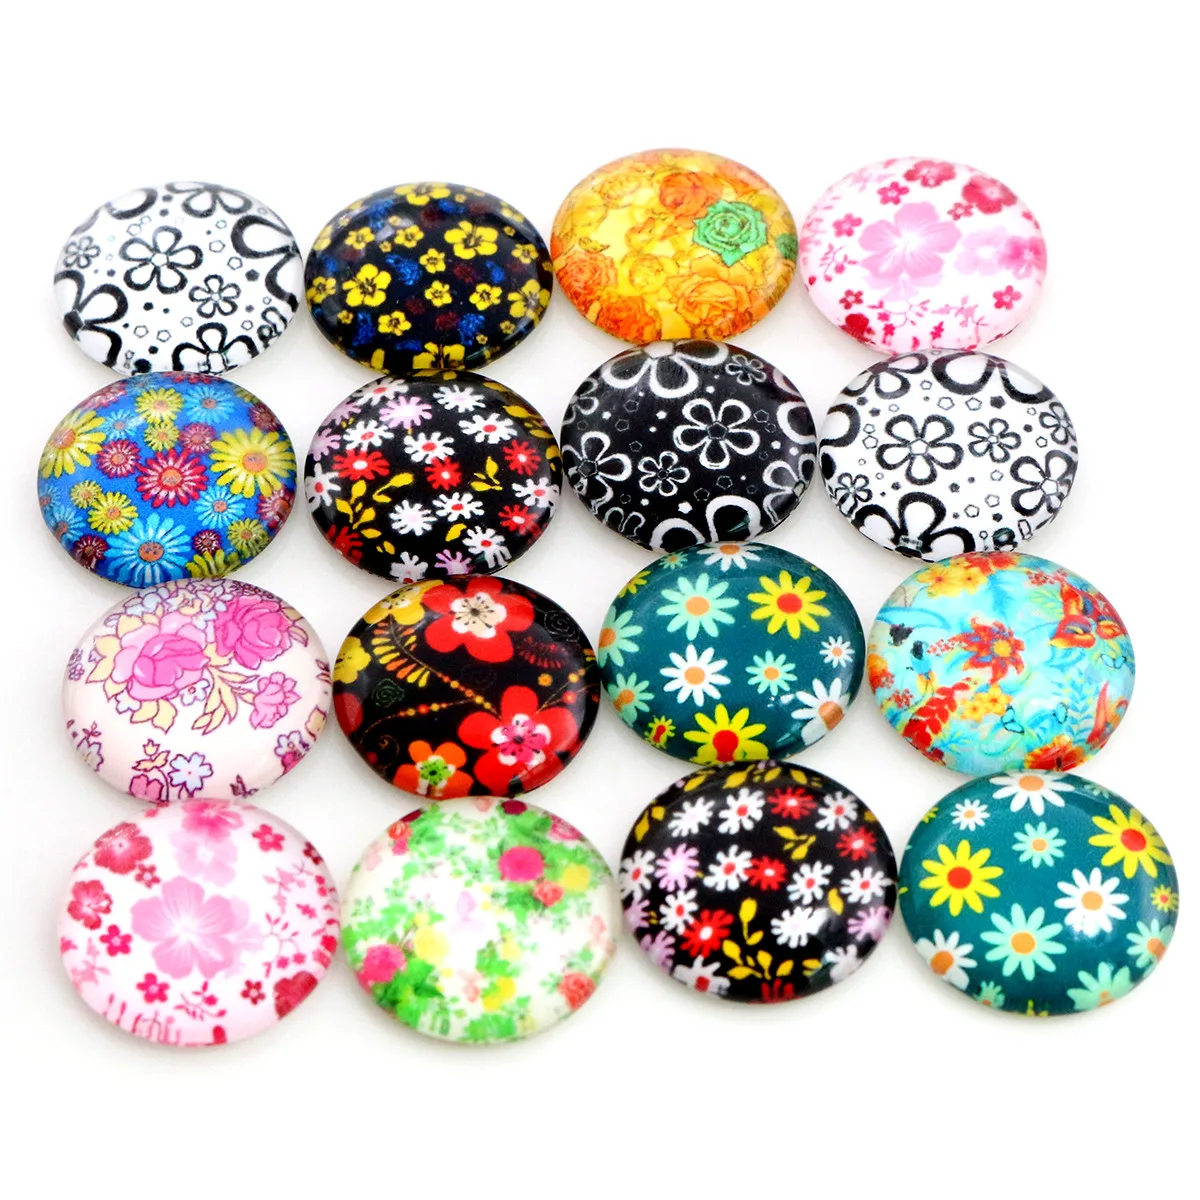 

10-50pcs/lot 8/10/12/14/16/18/20mm Mixed Flower Photo Glass Cabochons Dome DIY Jewelry Making Findings Supplies